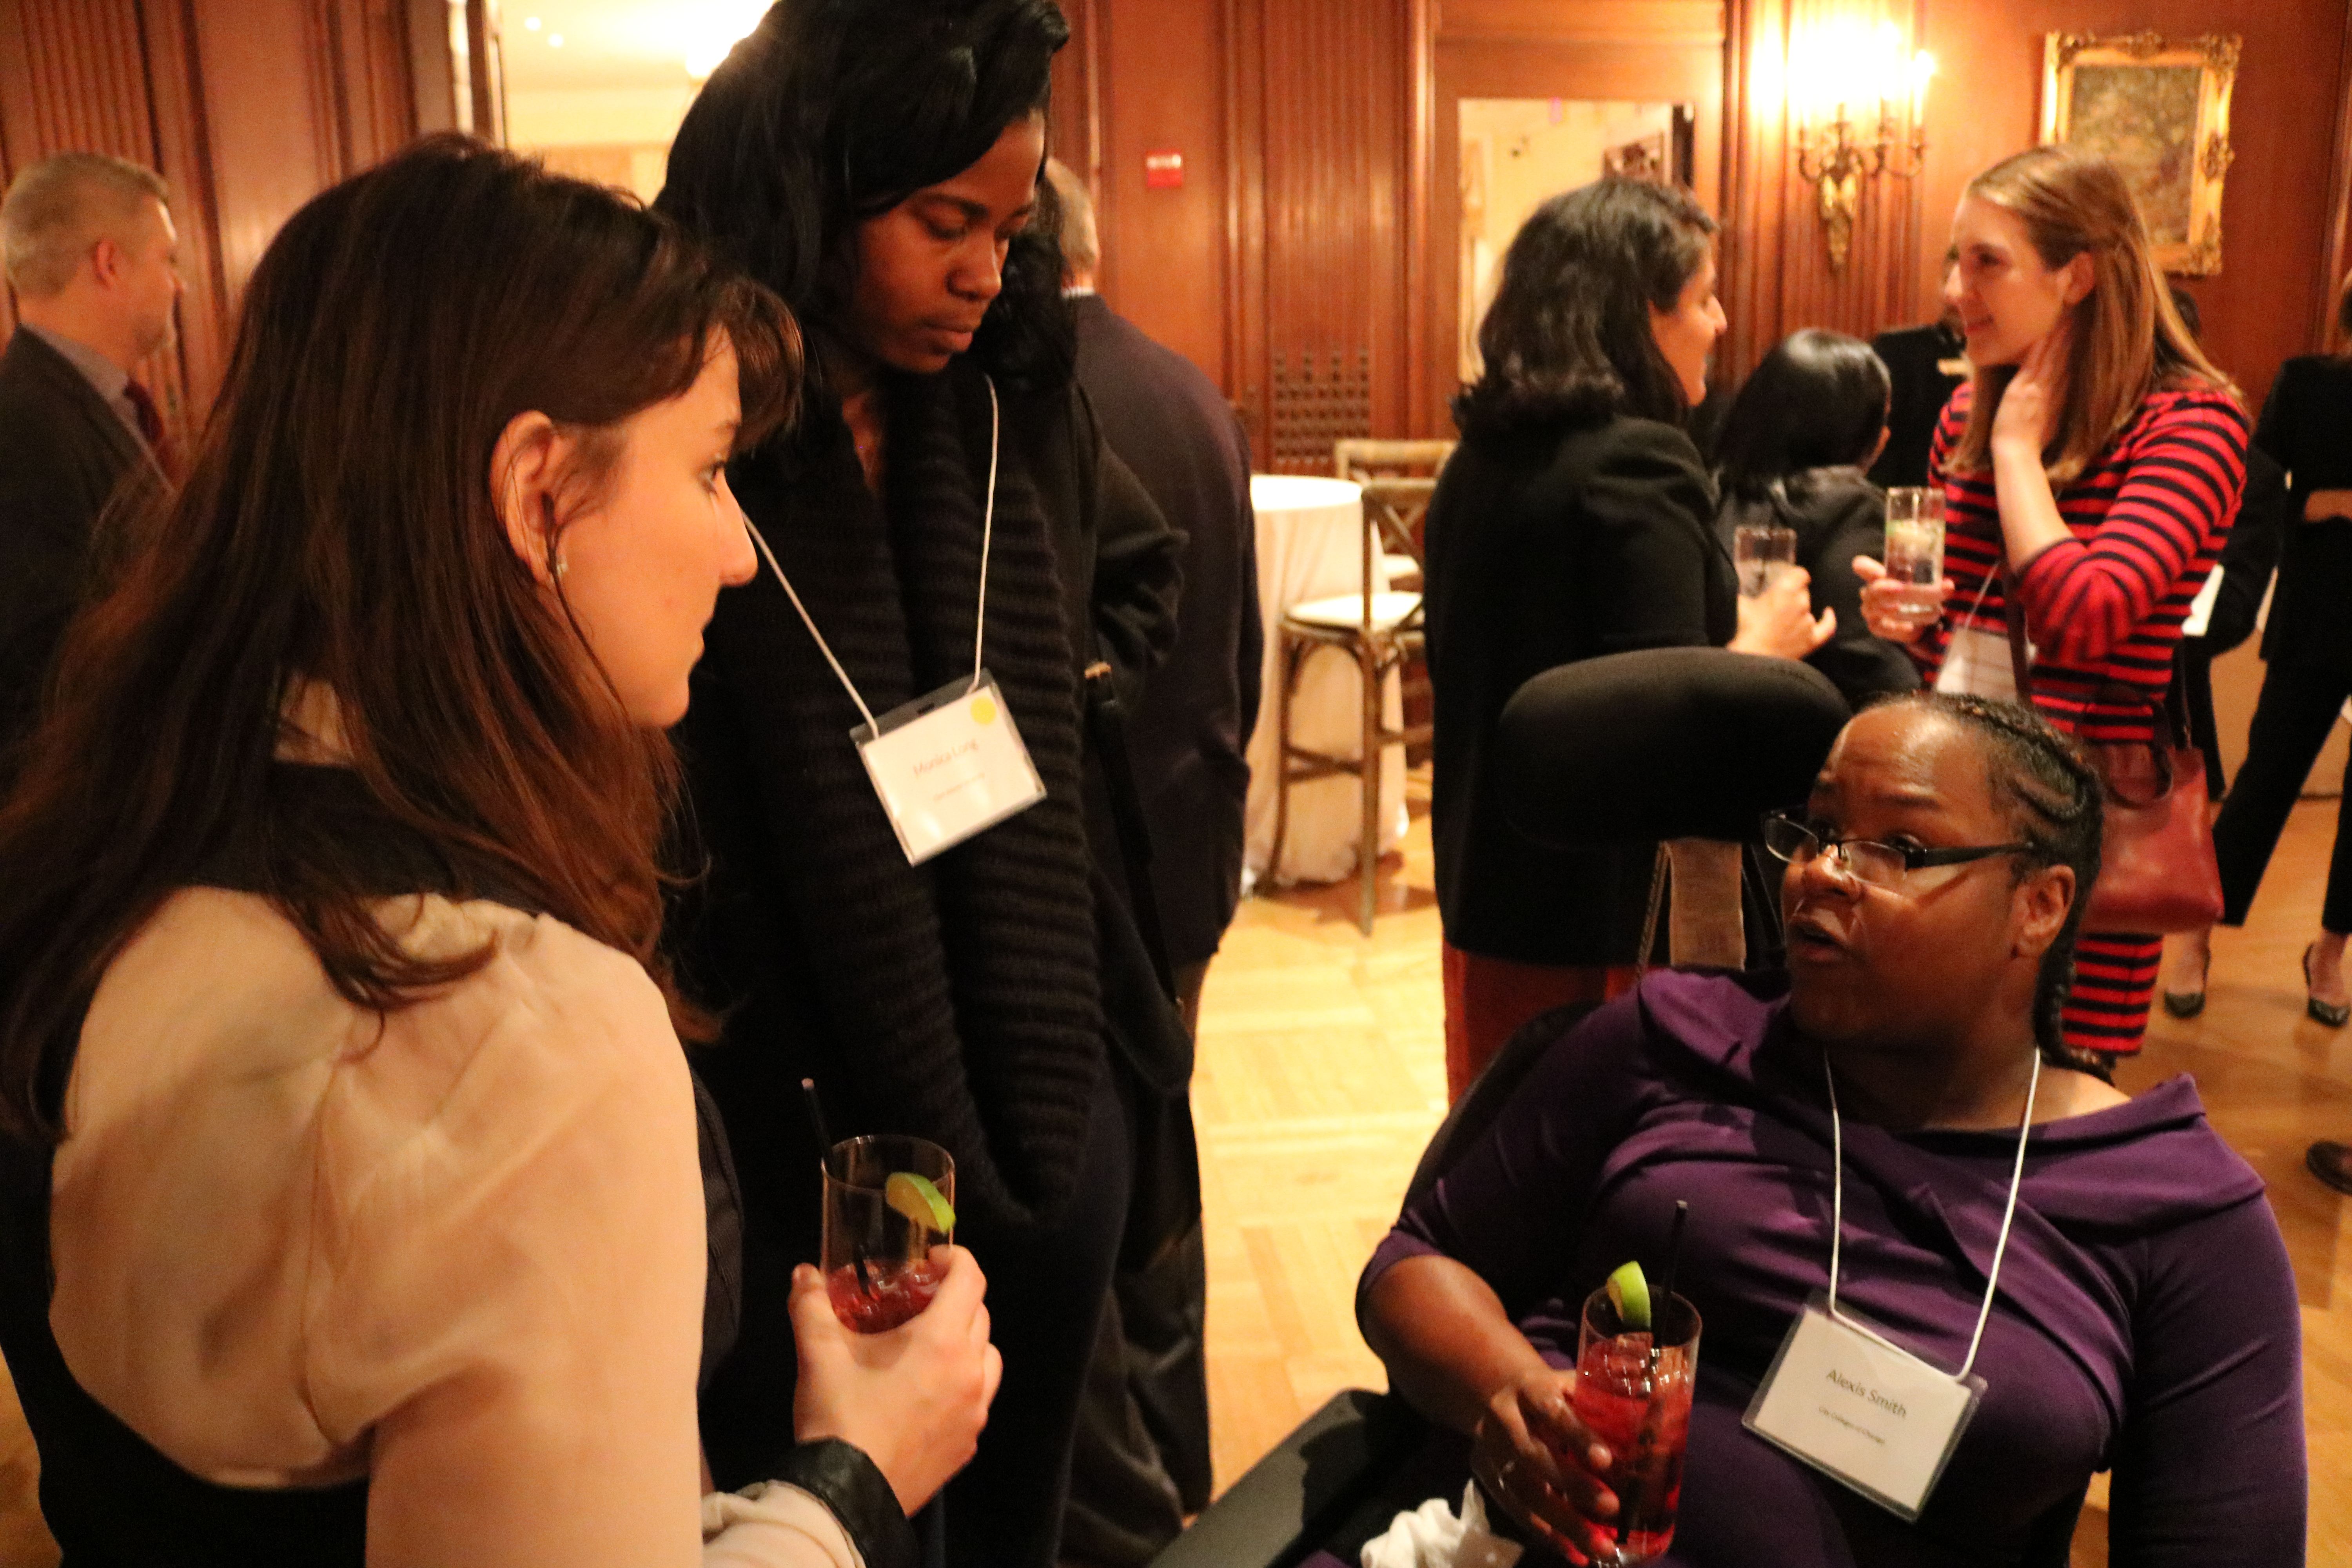 Student fellows Amanda Gordon, Monica Long, and Alexis Smith talk before the evening dinner. Image by Karena Phan. United States, 2018.